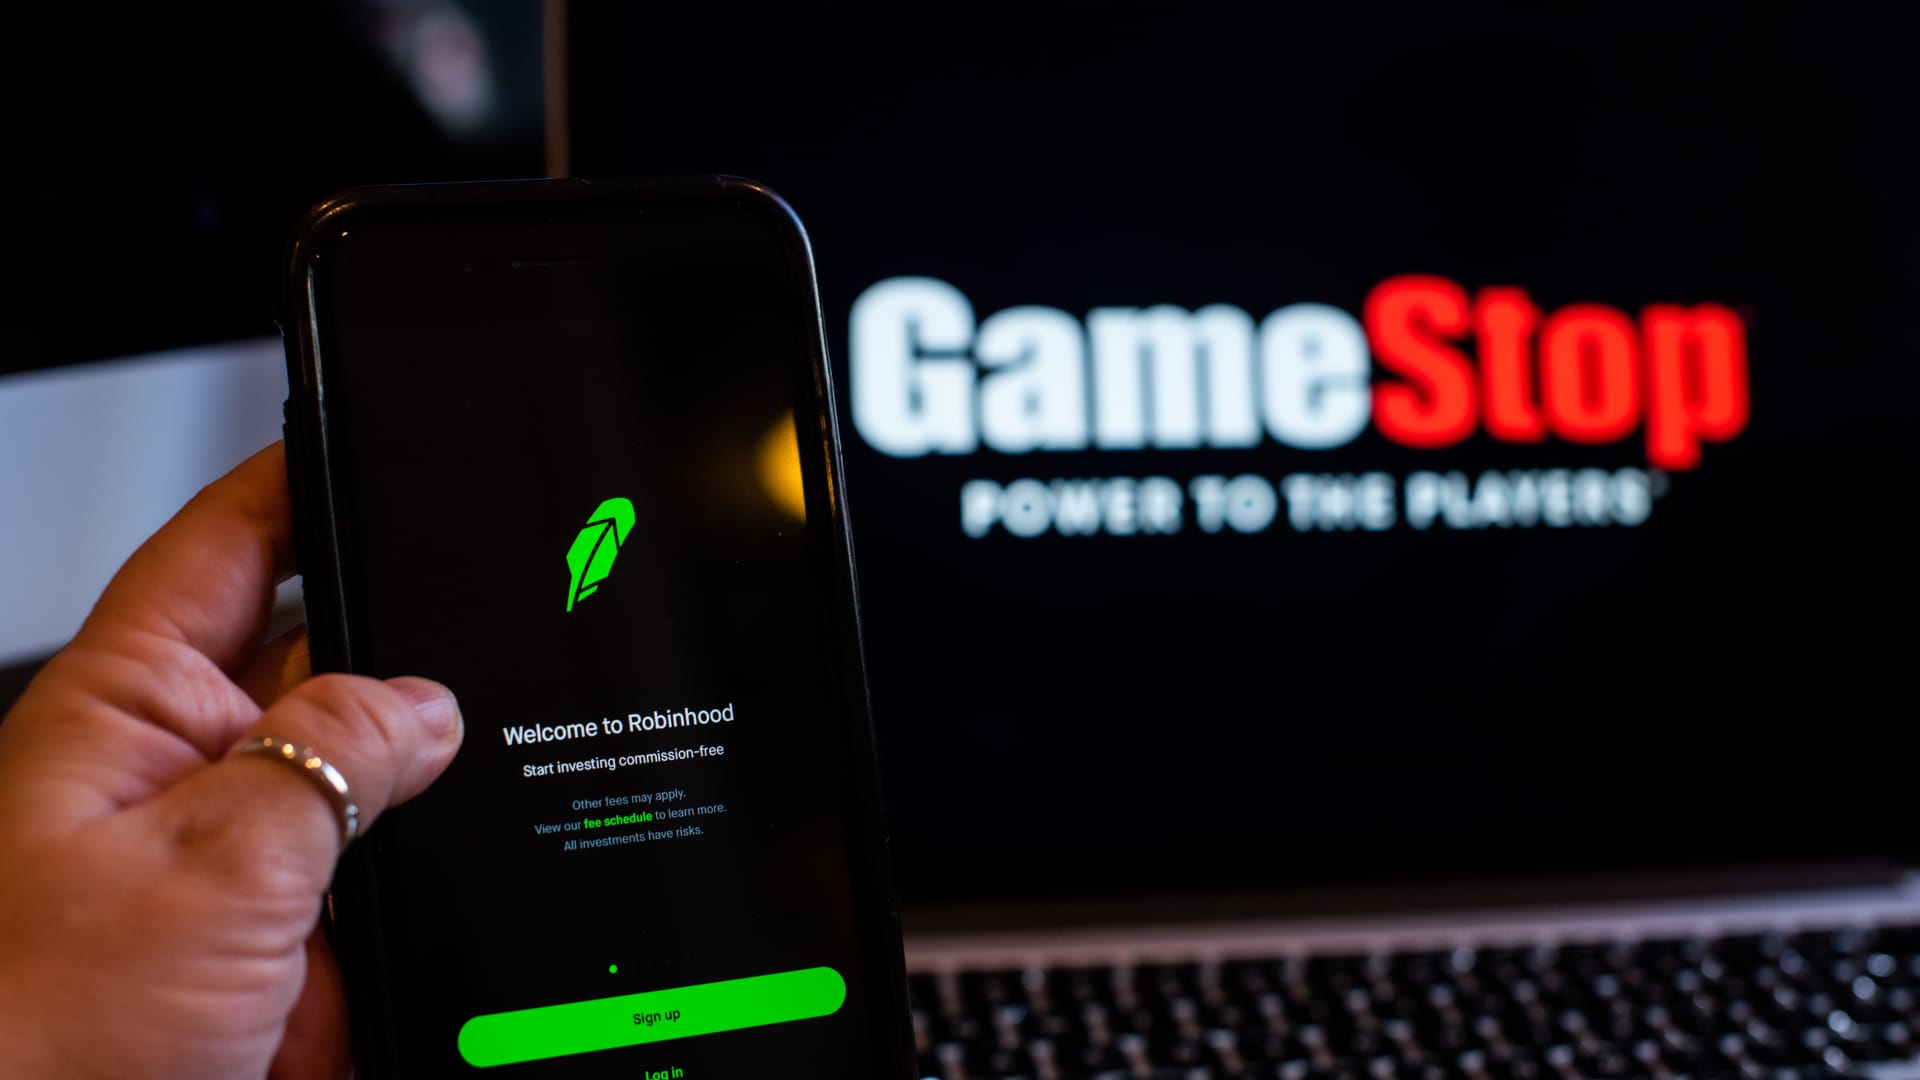 The GameStop Corp. logo on a laptop computer and Robinhood application on a smartphone.